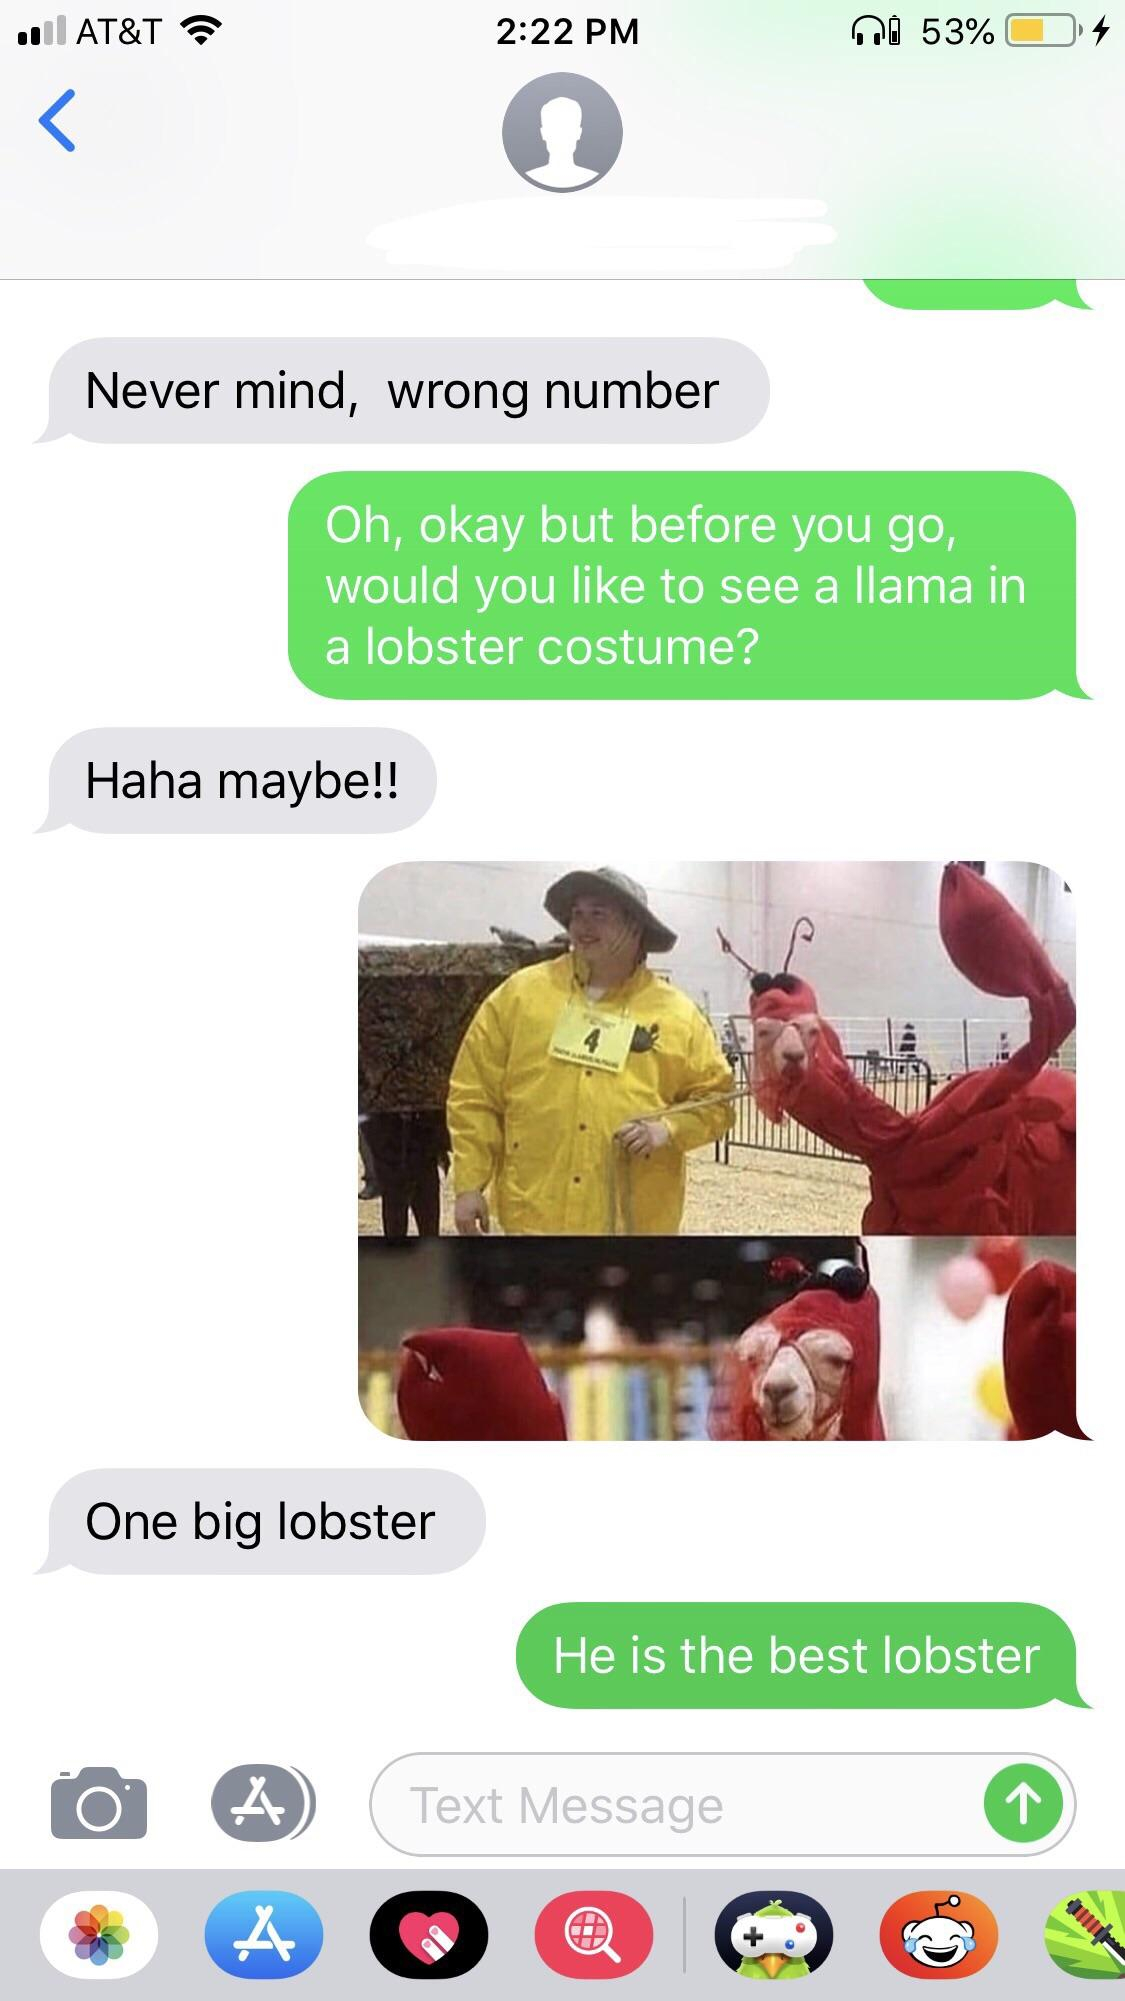 sarah from the conservative party texts - At&T 04 53% Never mind, wrong number Oh, okay but before you go, would you to see a llama in a lobster costume? Haha maybe!! One big lobster He is the best lobster Text Message